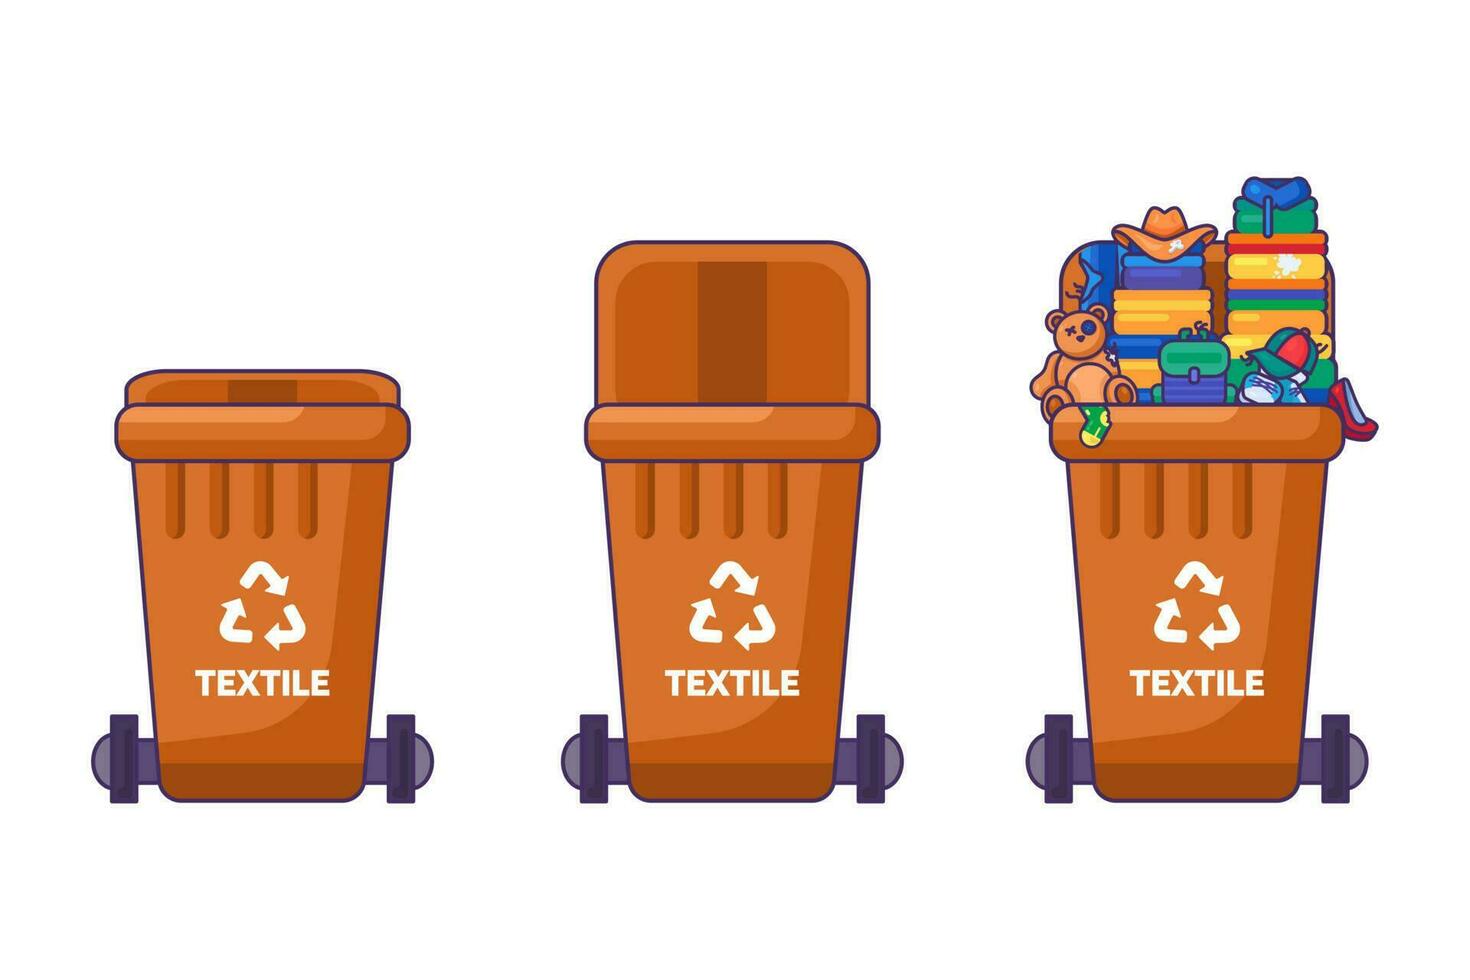 Textile Waste Recycling Sorting Lid Containers vector